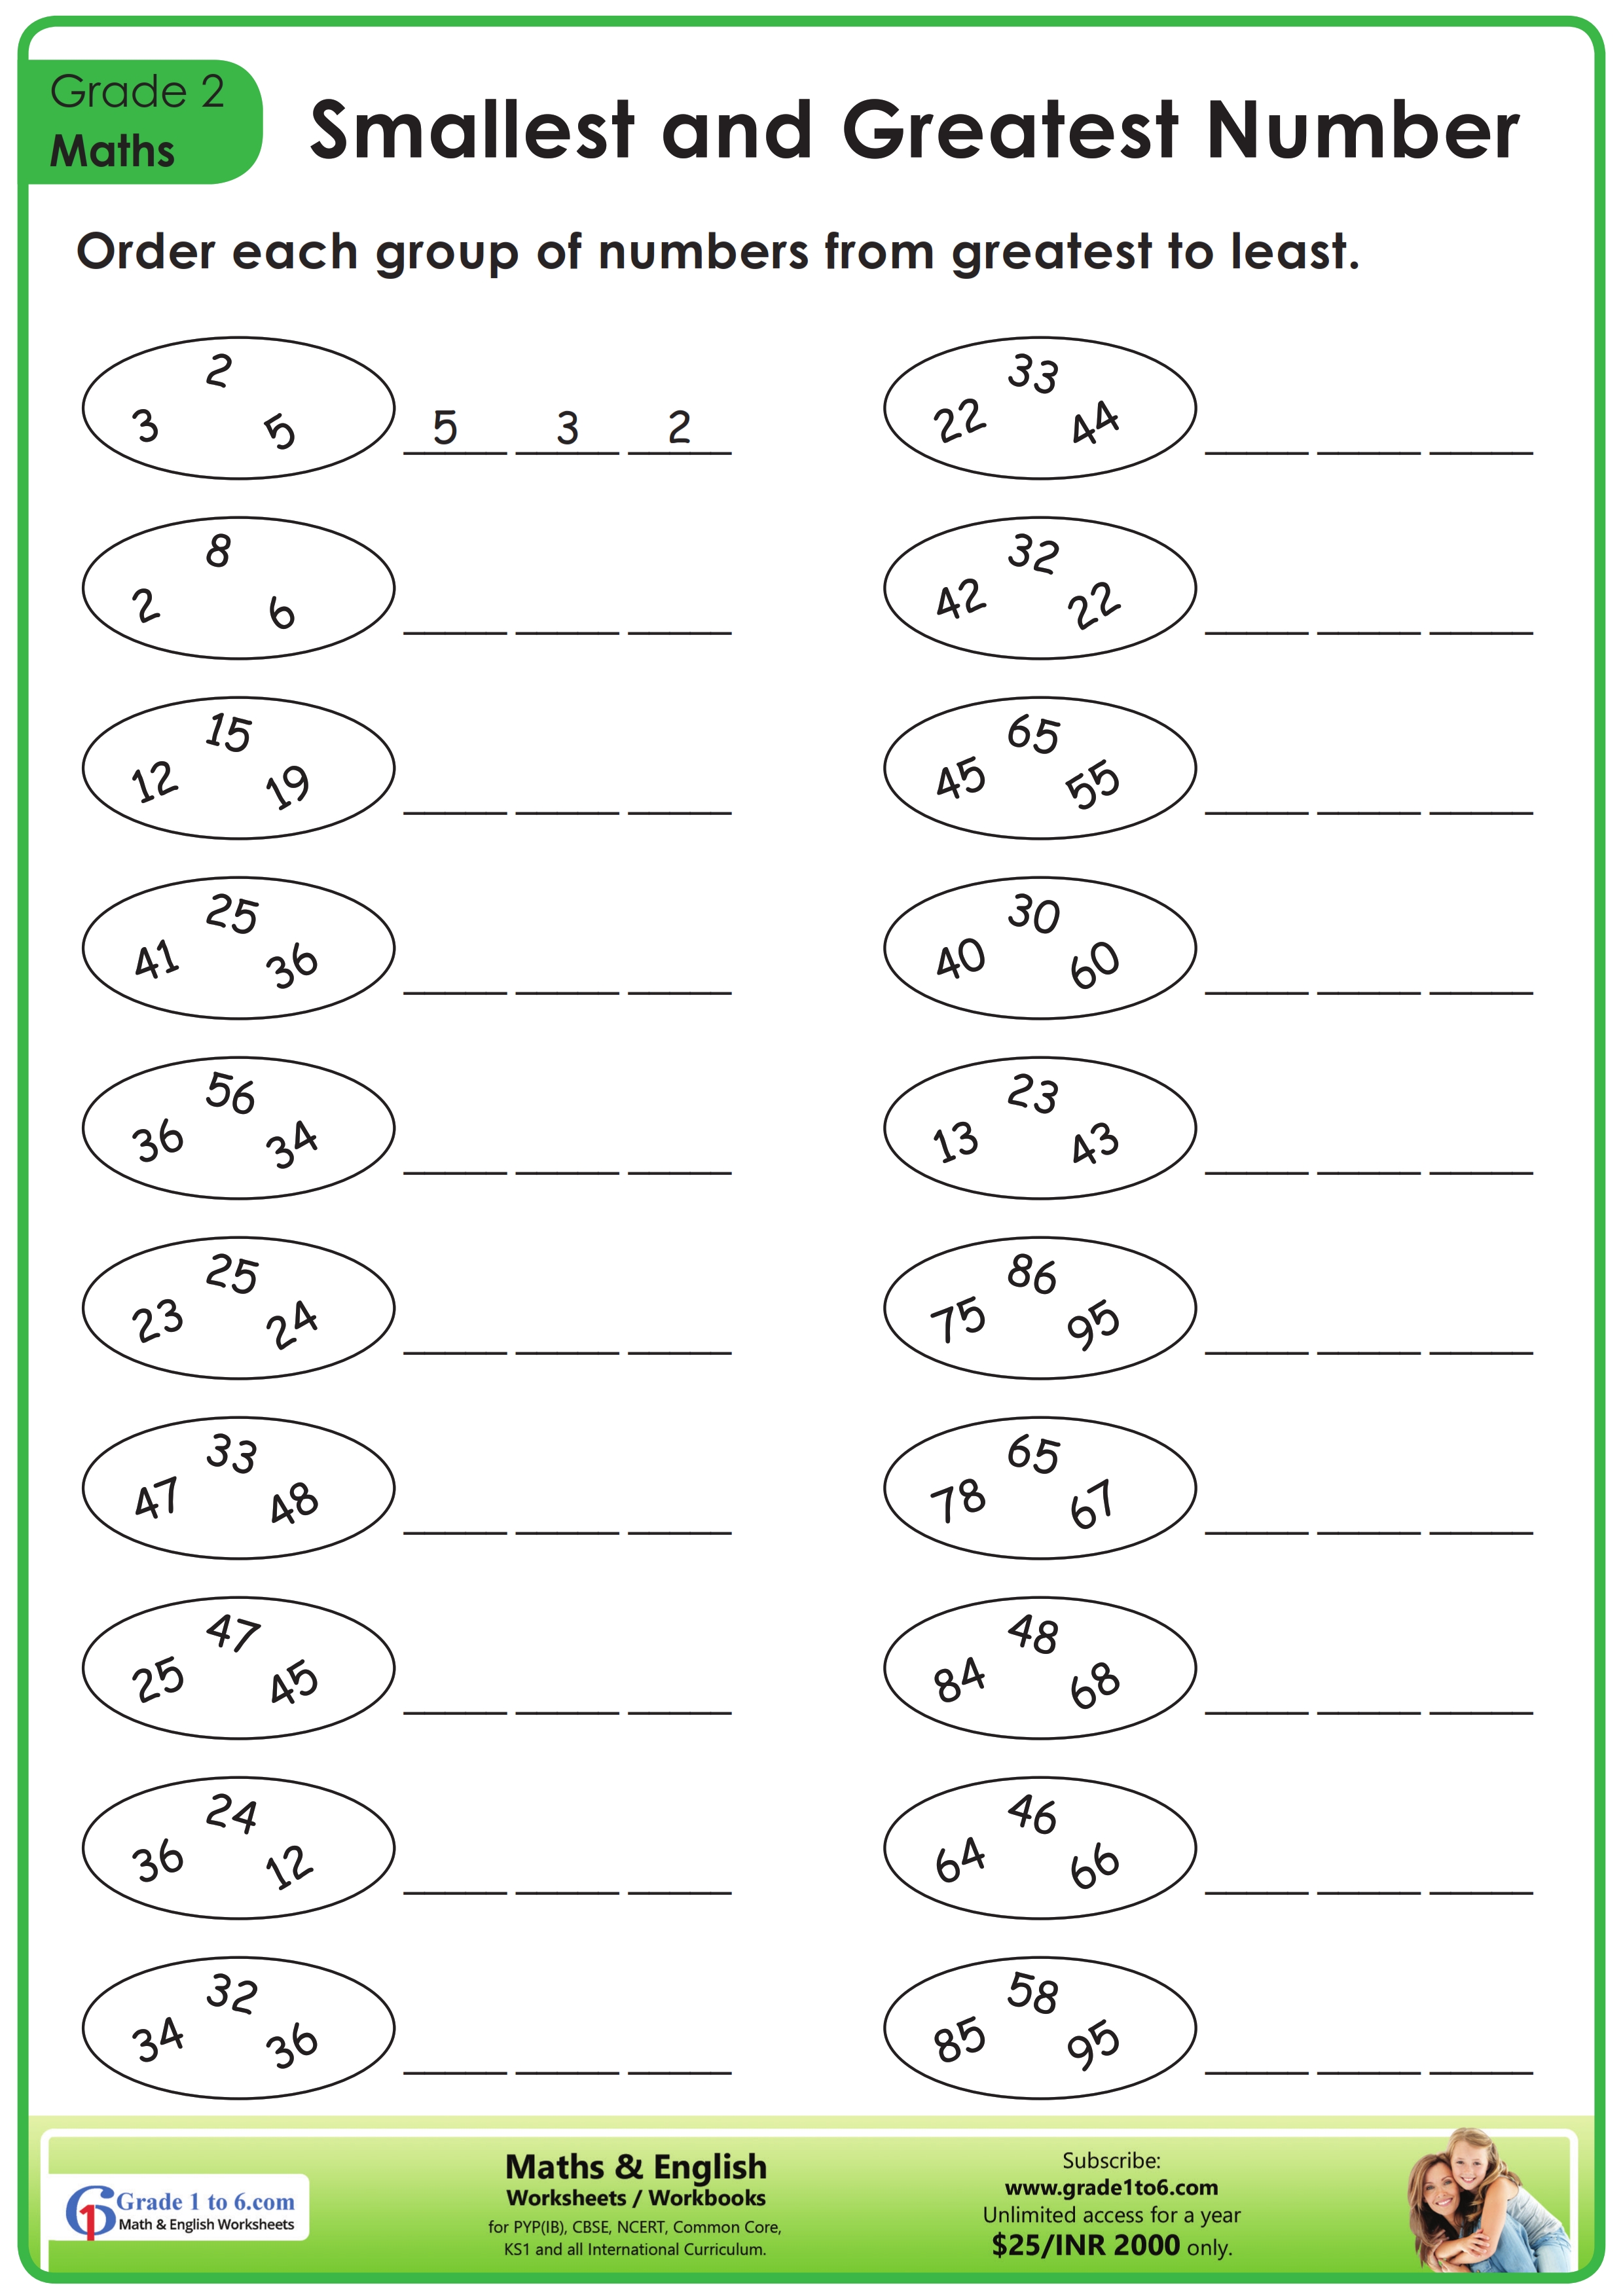 ordering-numbers-greatest-to-least-worksheet-grade1to6